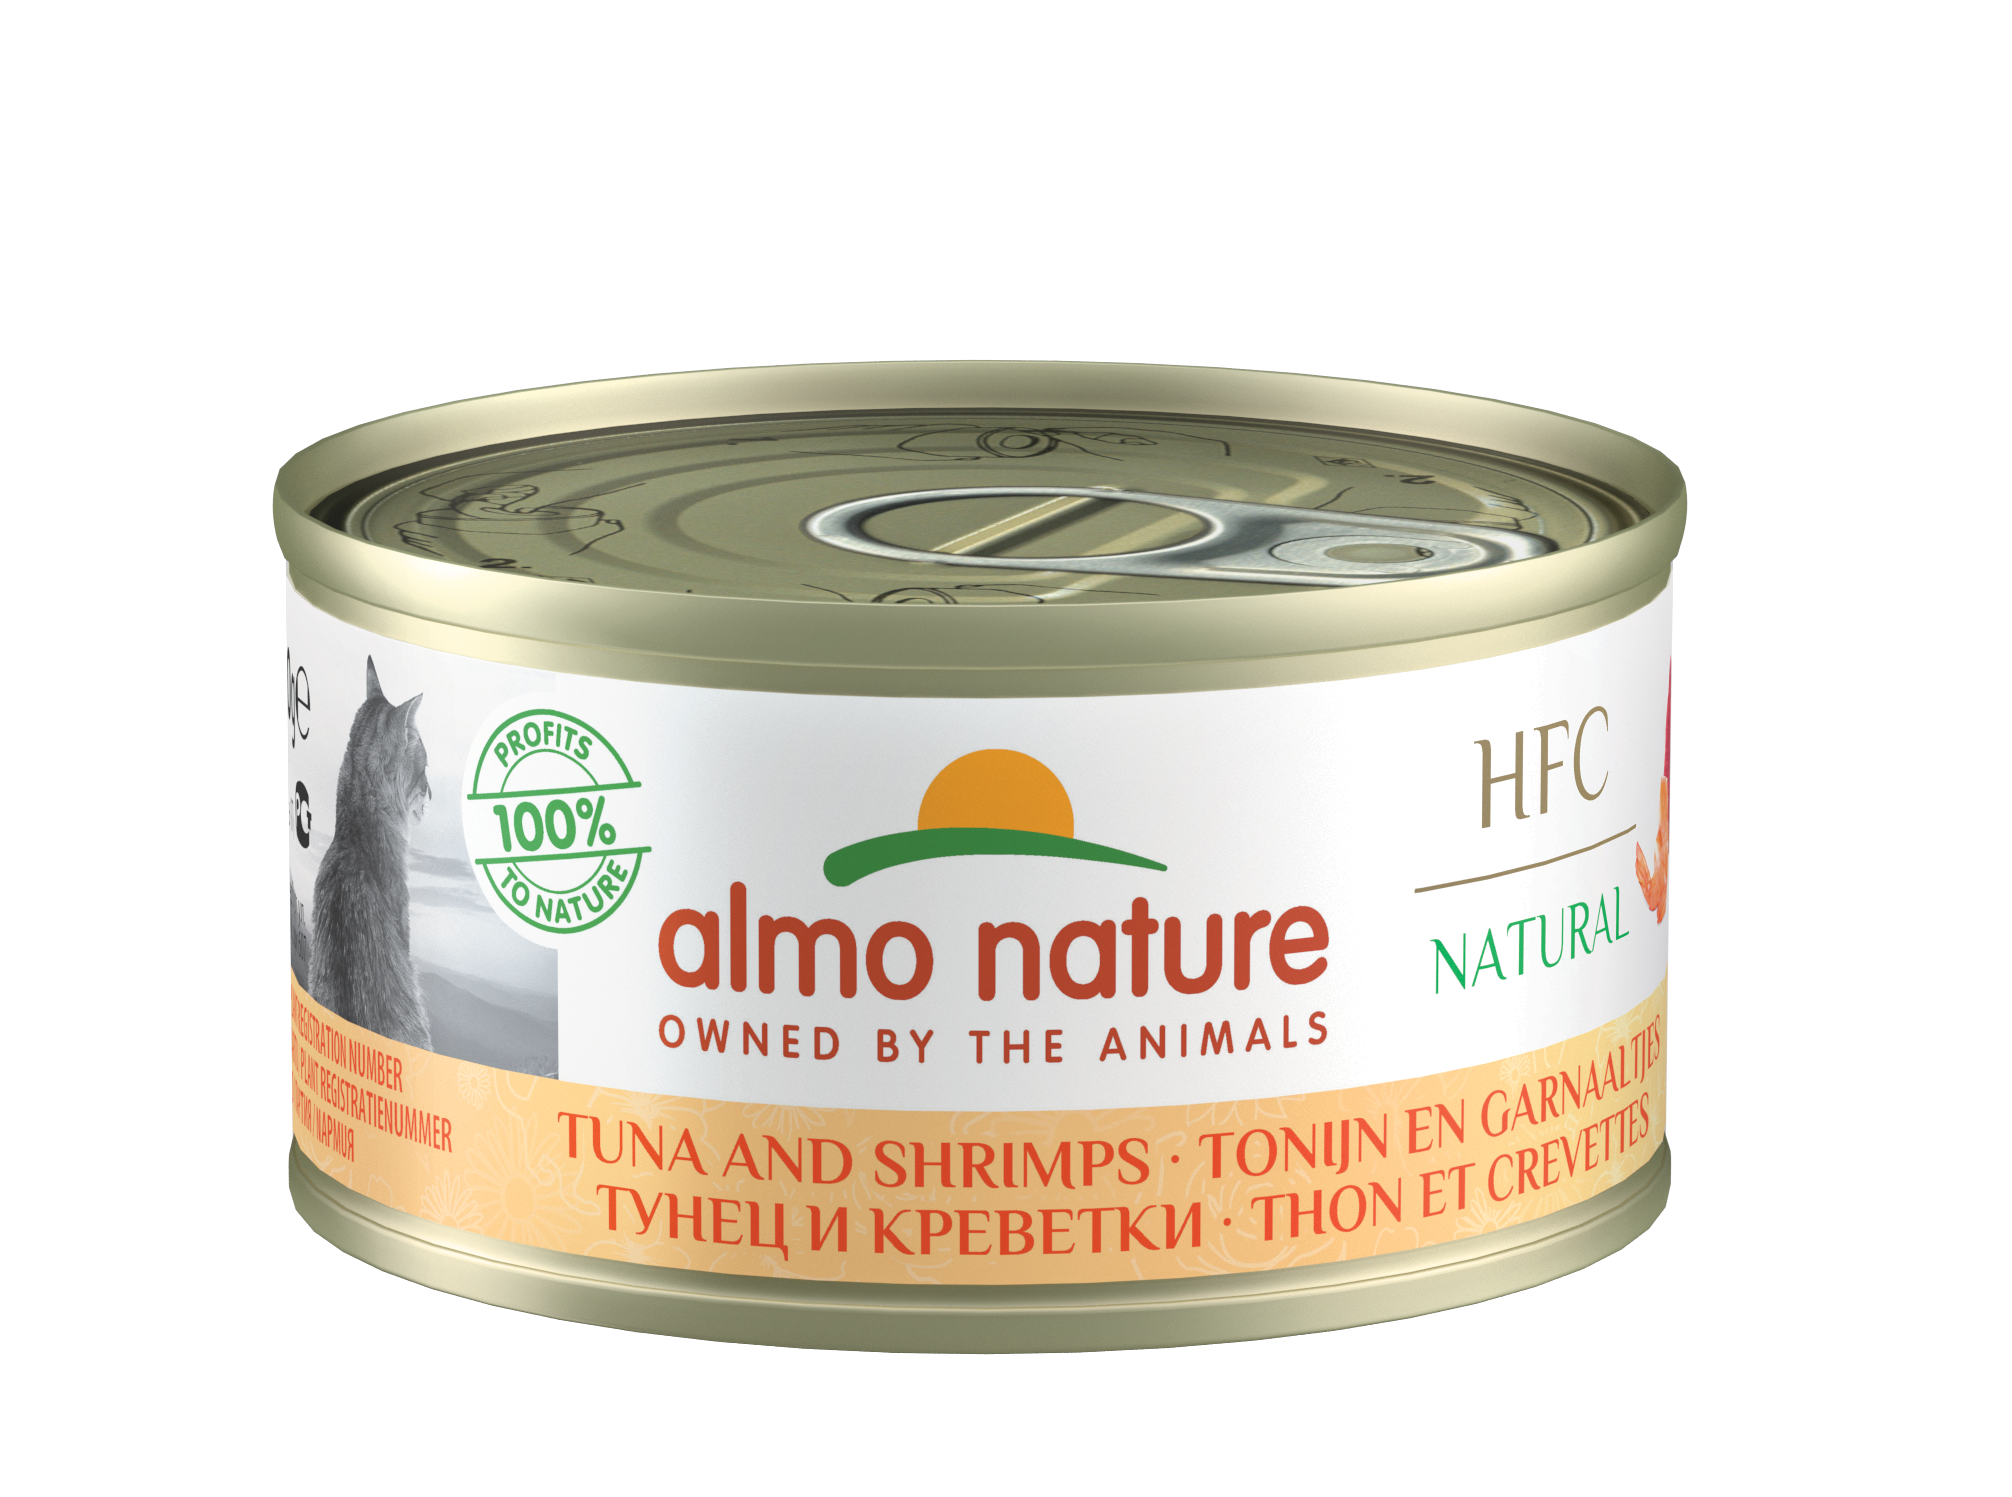 Almo Nature - HFC Natural Tuna and Shrimps 70g for Cats